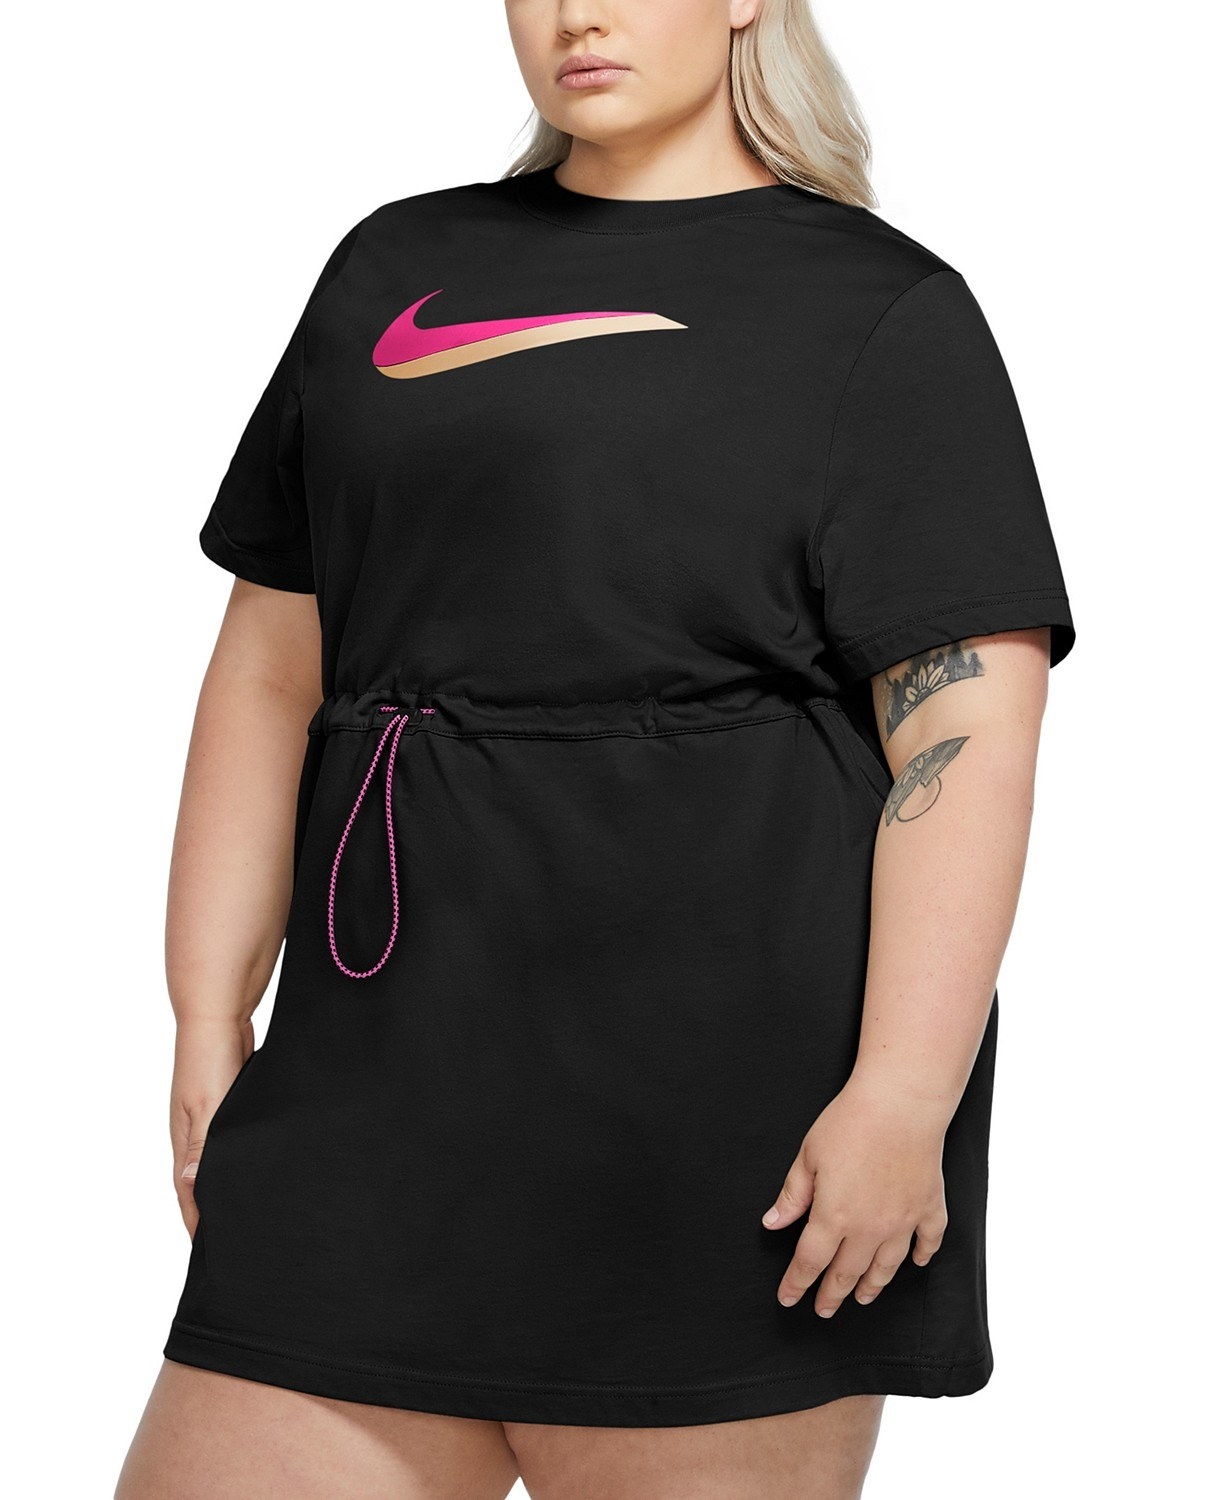 Model wearing the black minidress with a pink nike swoosh on the chest